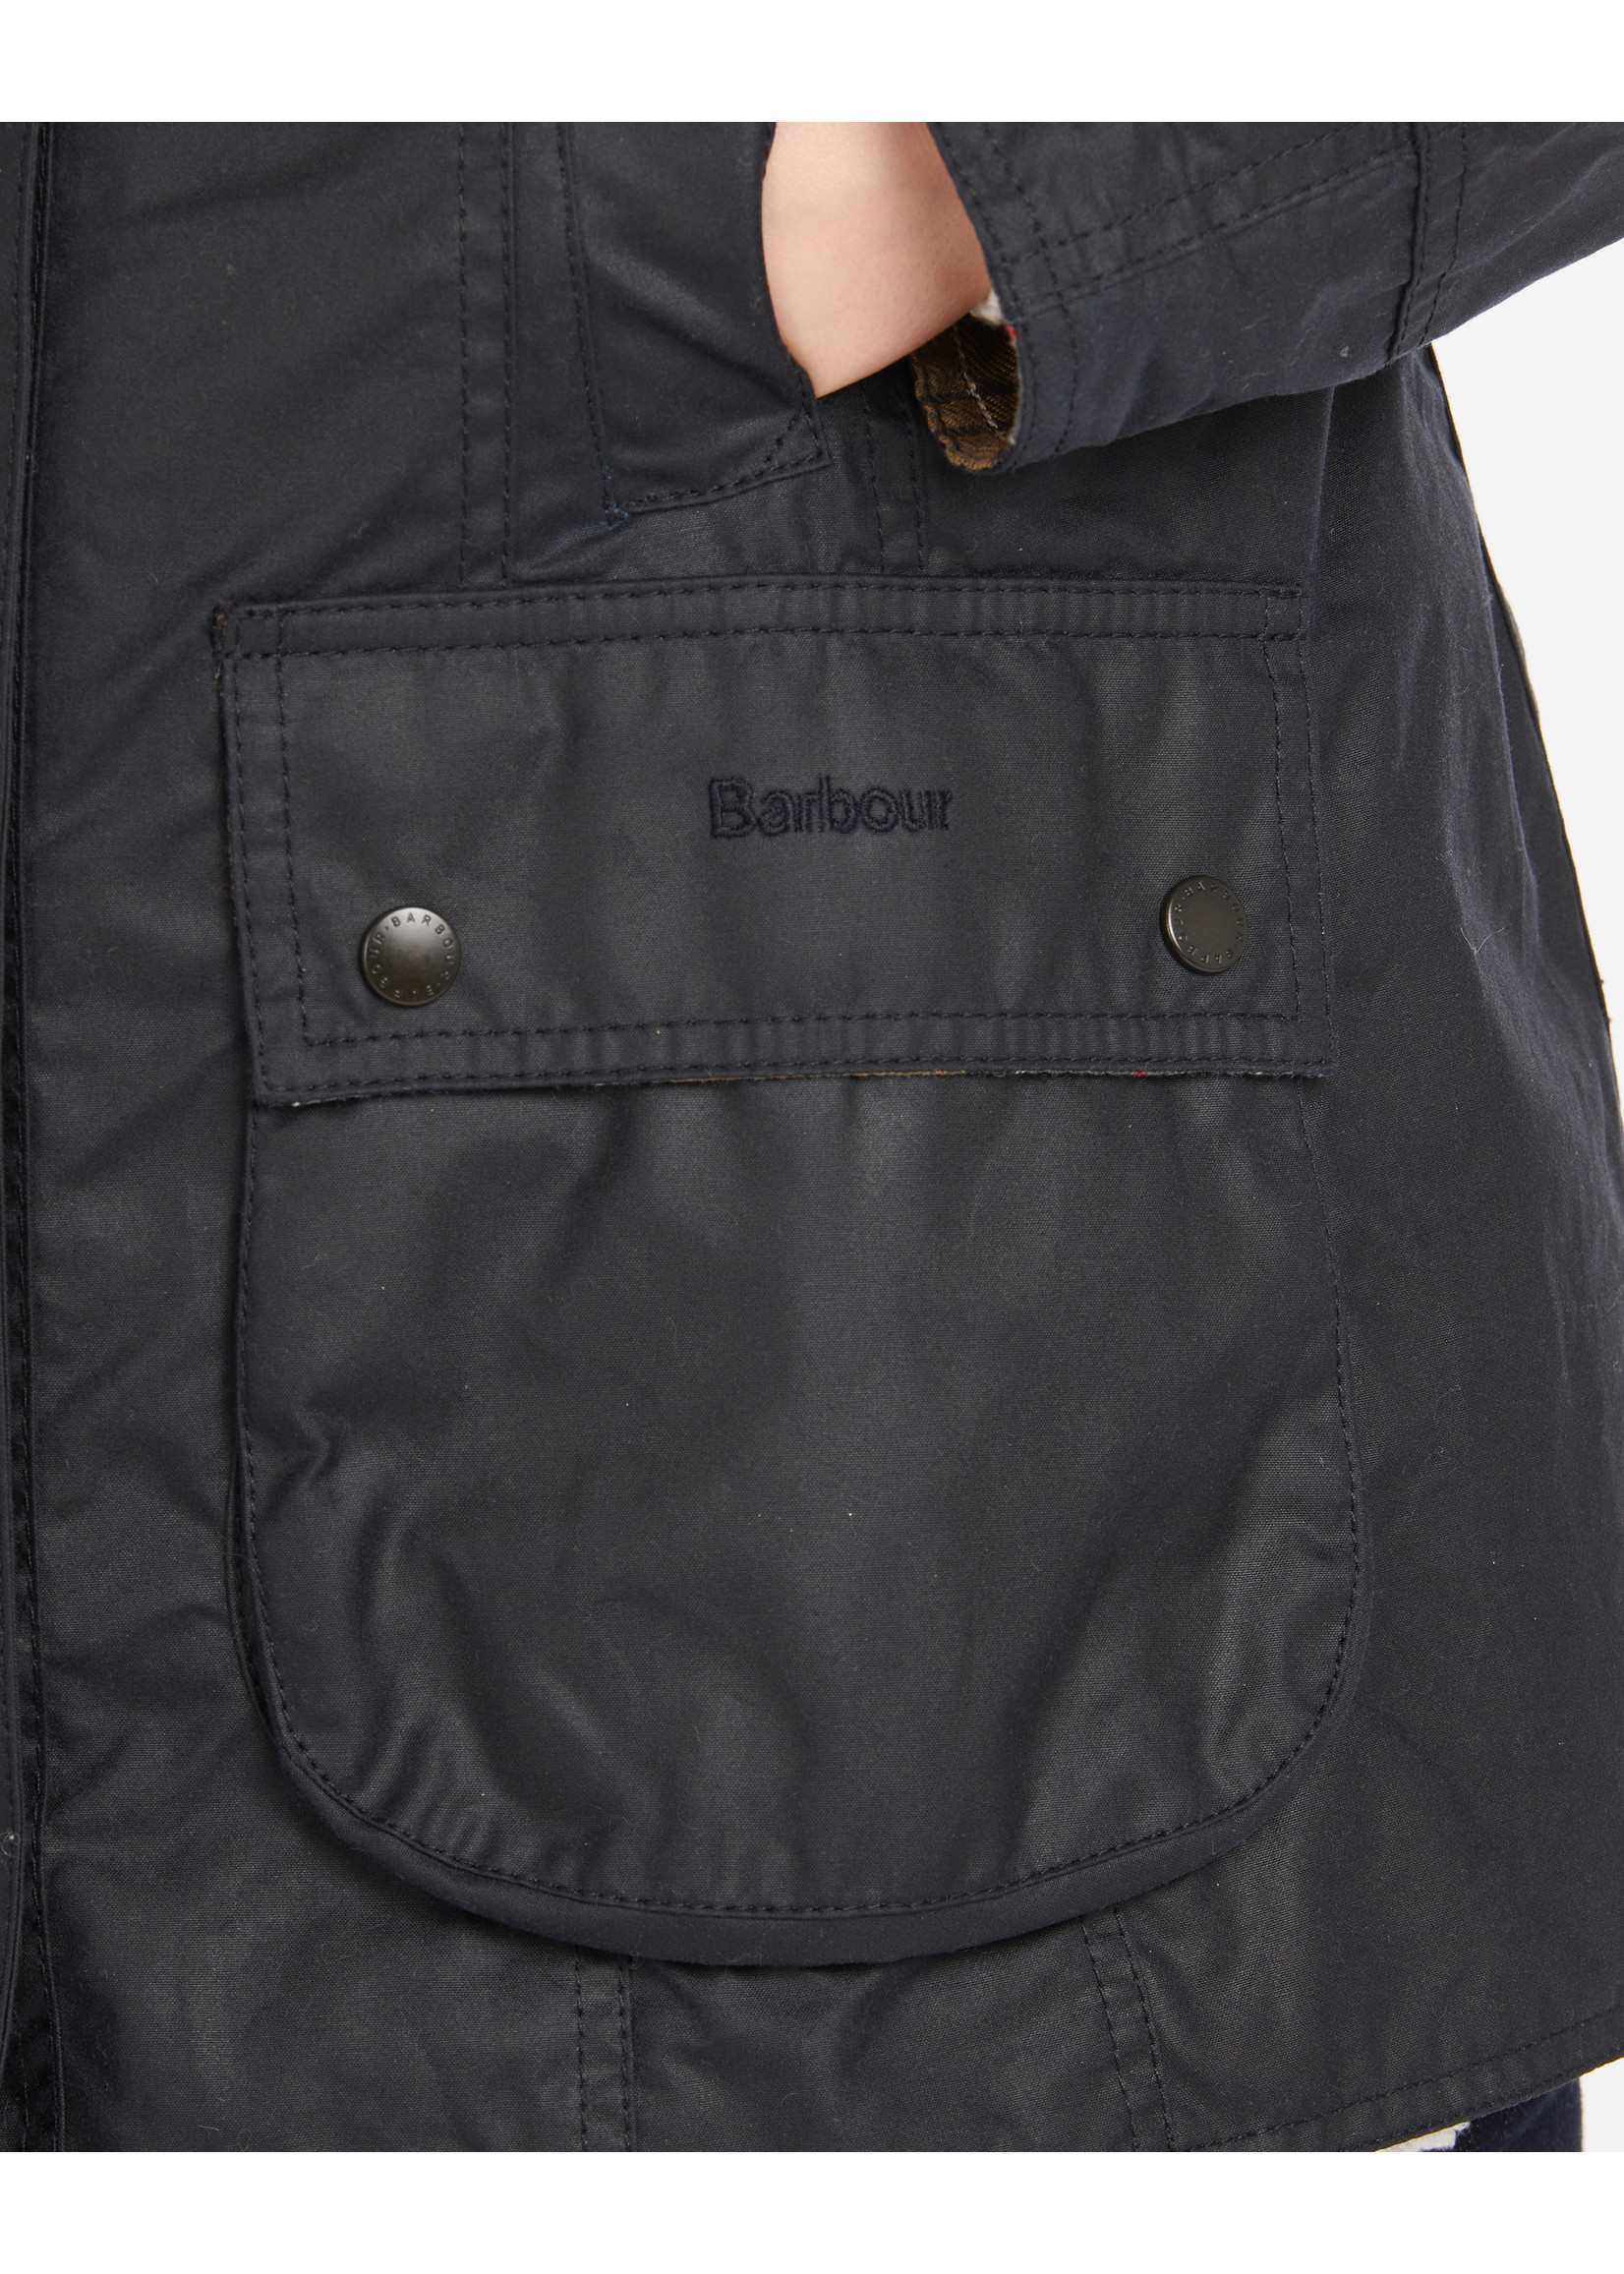 Barbour BEADNELL WAX JACKET